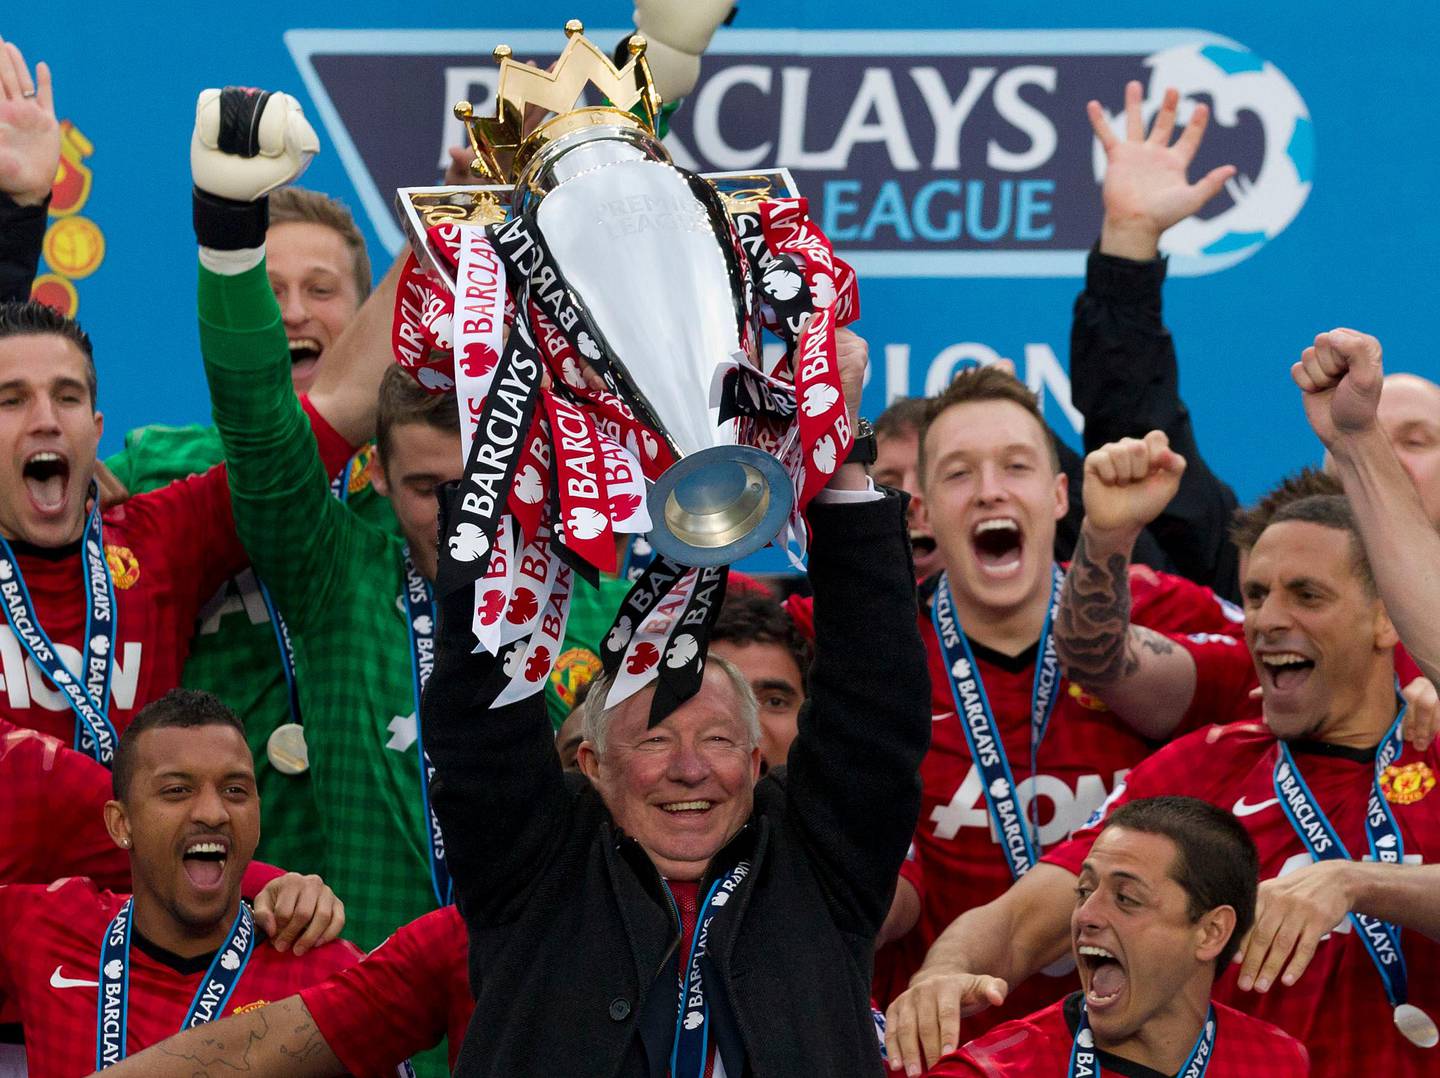 Manchester United's manager Sir Alex Ferguson, center, lifts the premier league trophy after his last home game in charge of the club, their English Premier League soccer match against Swansea City, at Old Trafford Stadium, Manchester, England, Sunday May 12, 2013. (AP Photo/Jon Super)